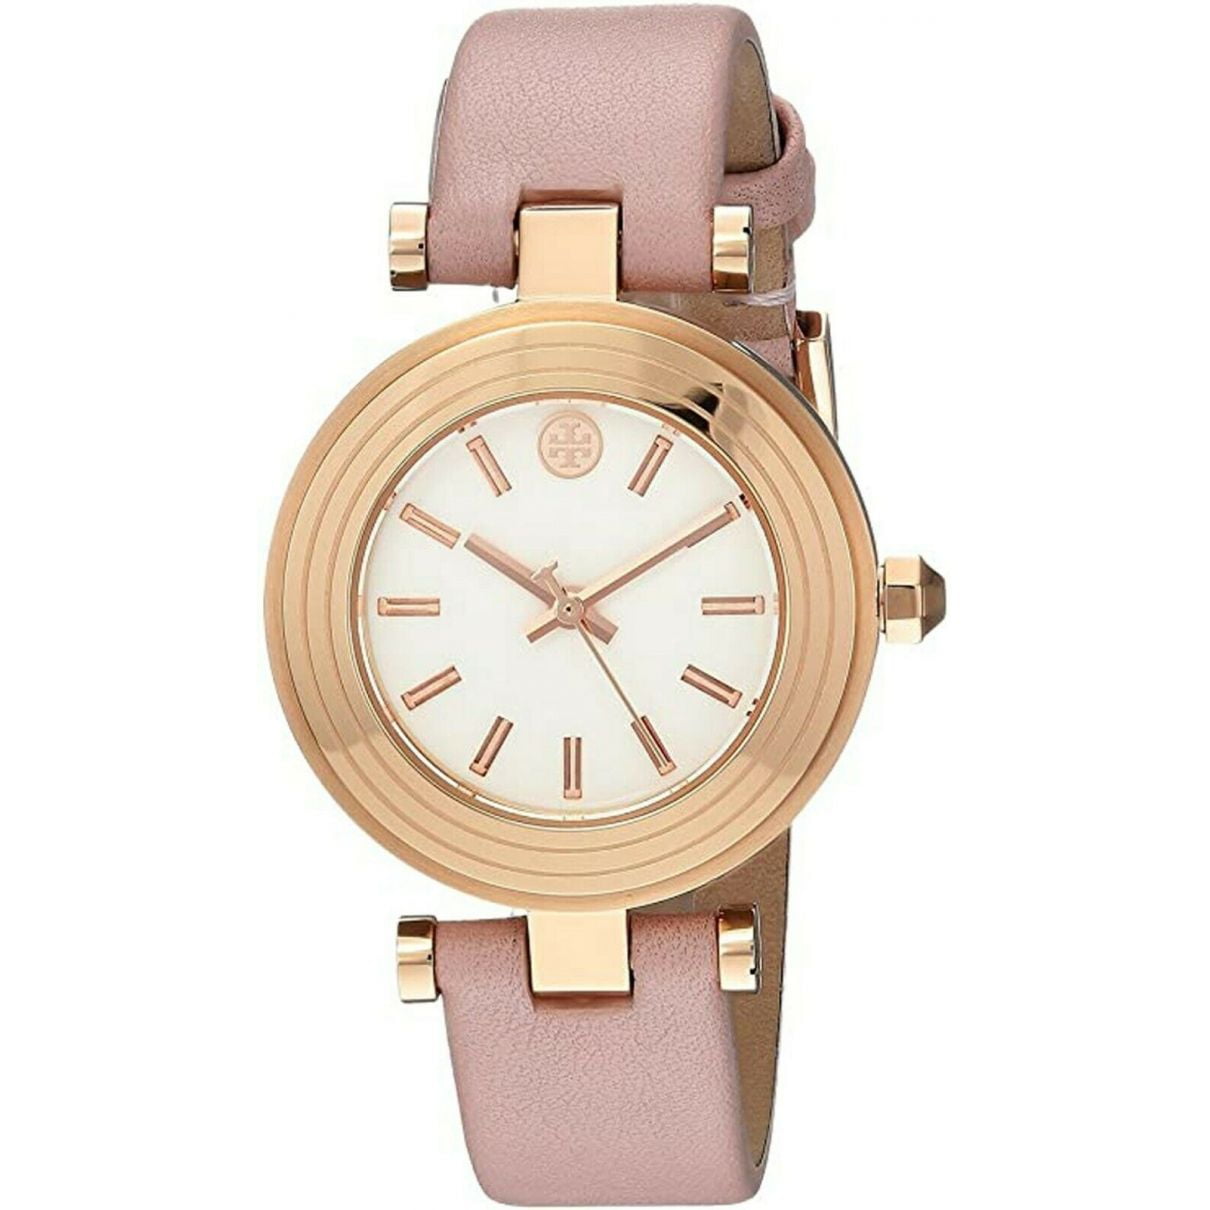 TORY BURCH TBW9008 CLASSIC T ROSE GOLD PINK LEATHER WOMEN'S WATCH -  